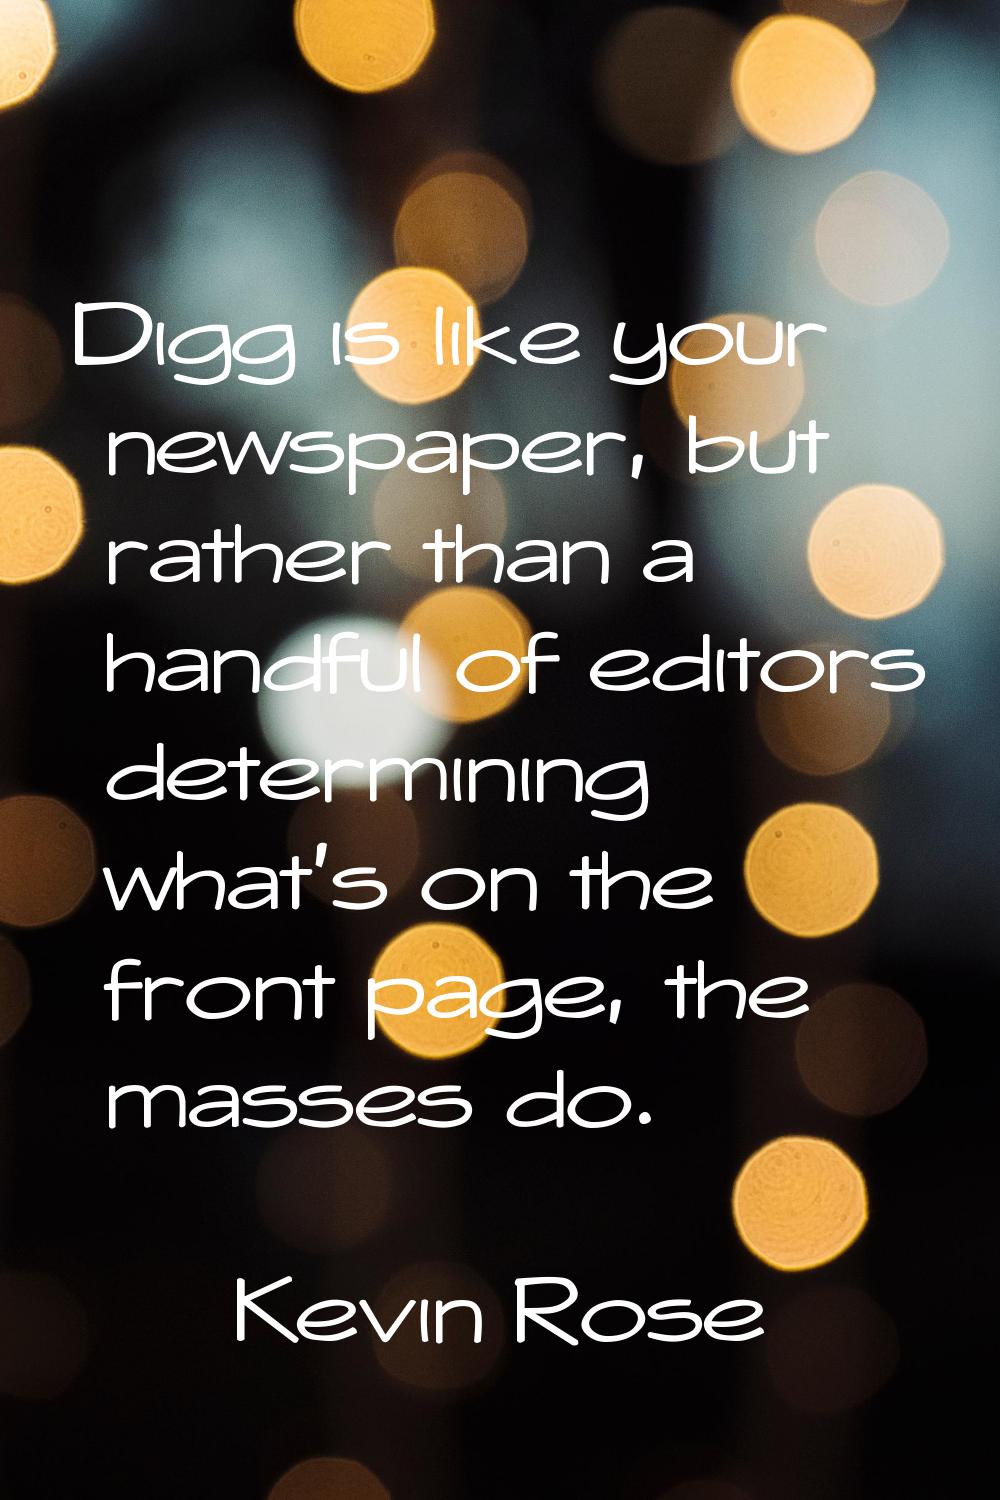 Digg is like your newspaper, but rather than a handful of editors determining what's on the front p